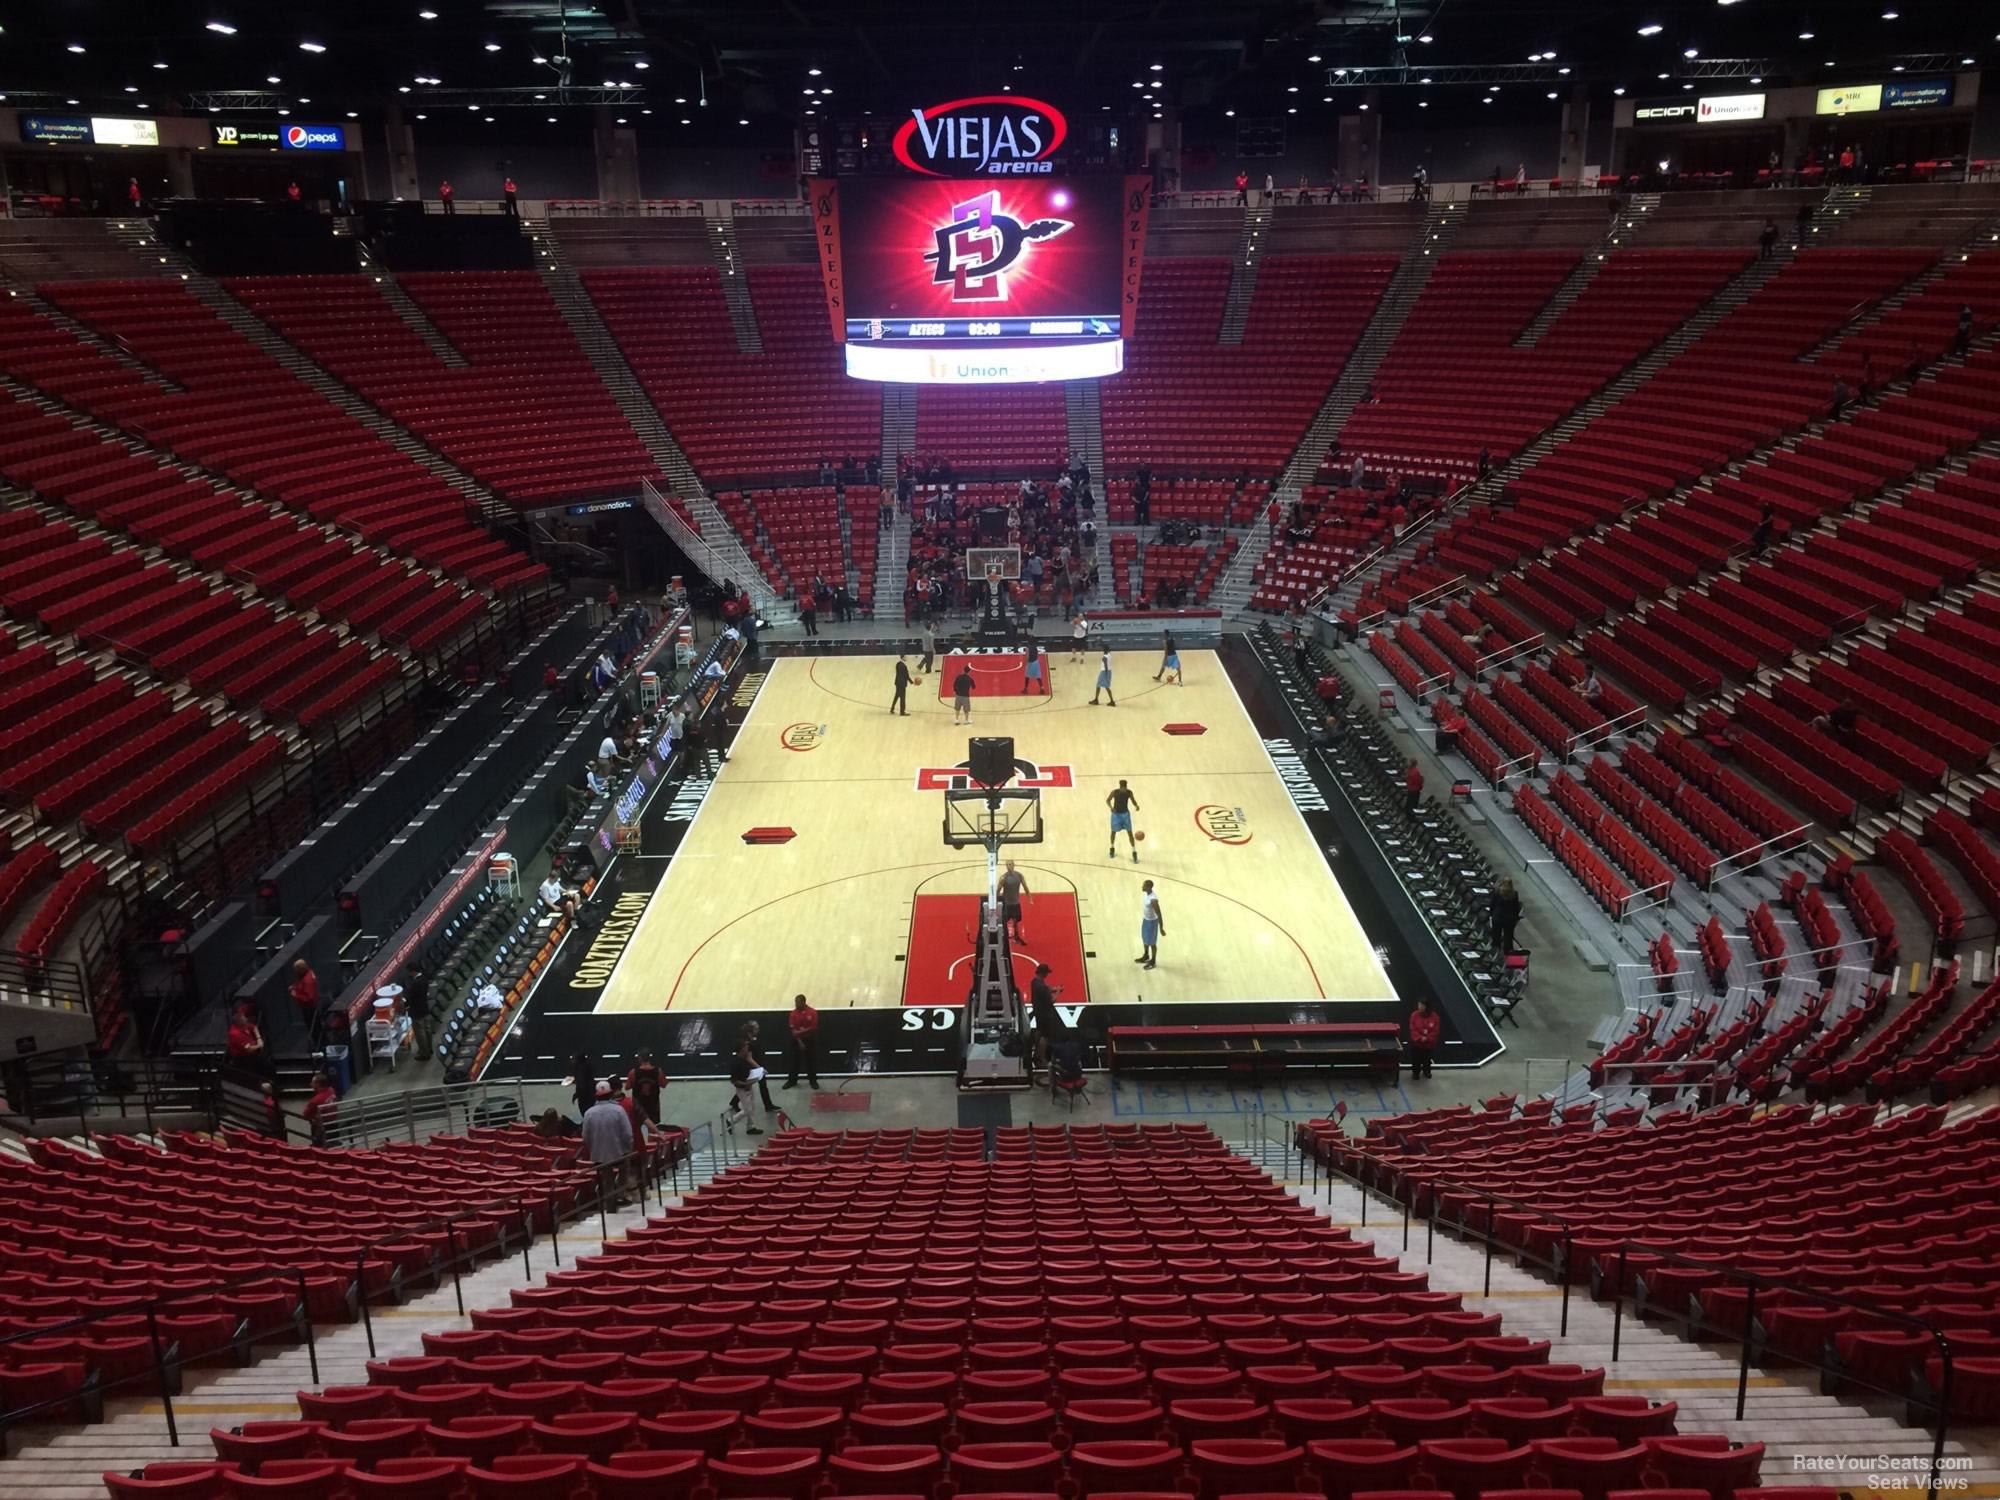 section a, row 30 seat view  - viejas arena